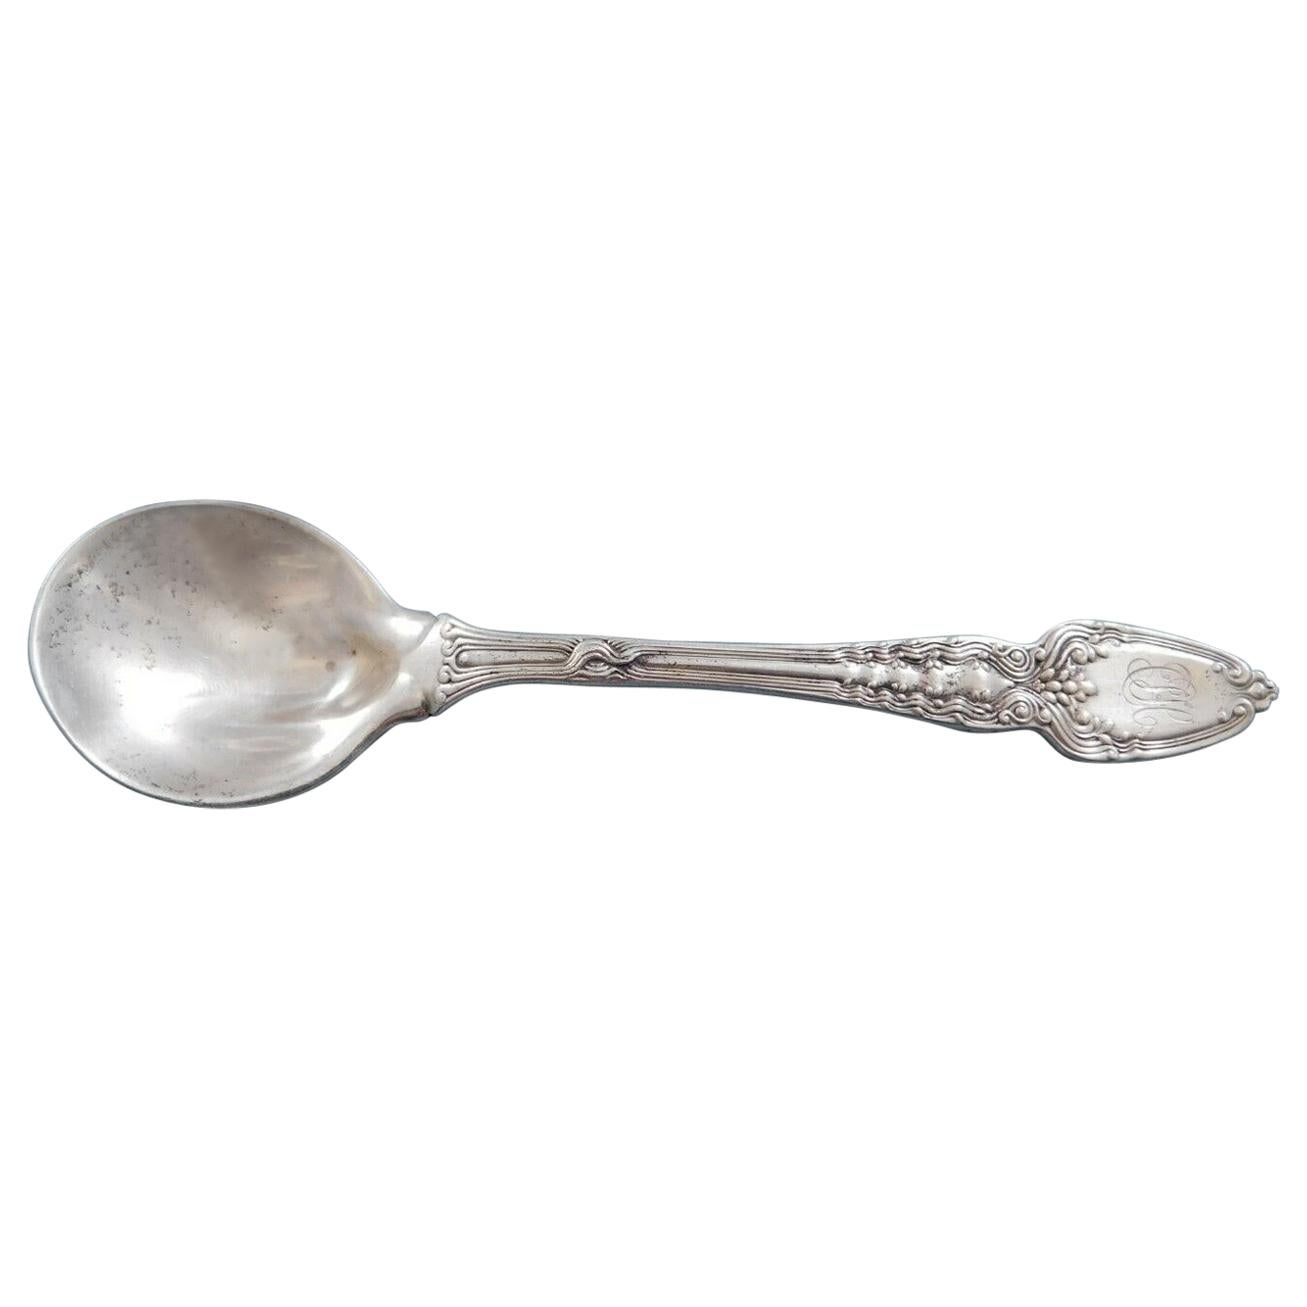 Broom Corn by Tiffany & Co. Sterling Silver Sherbet Spoon Pinched